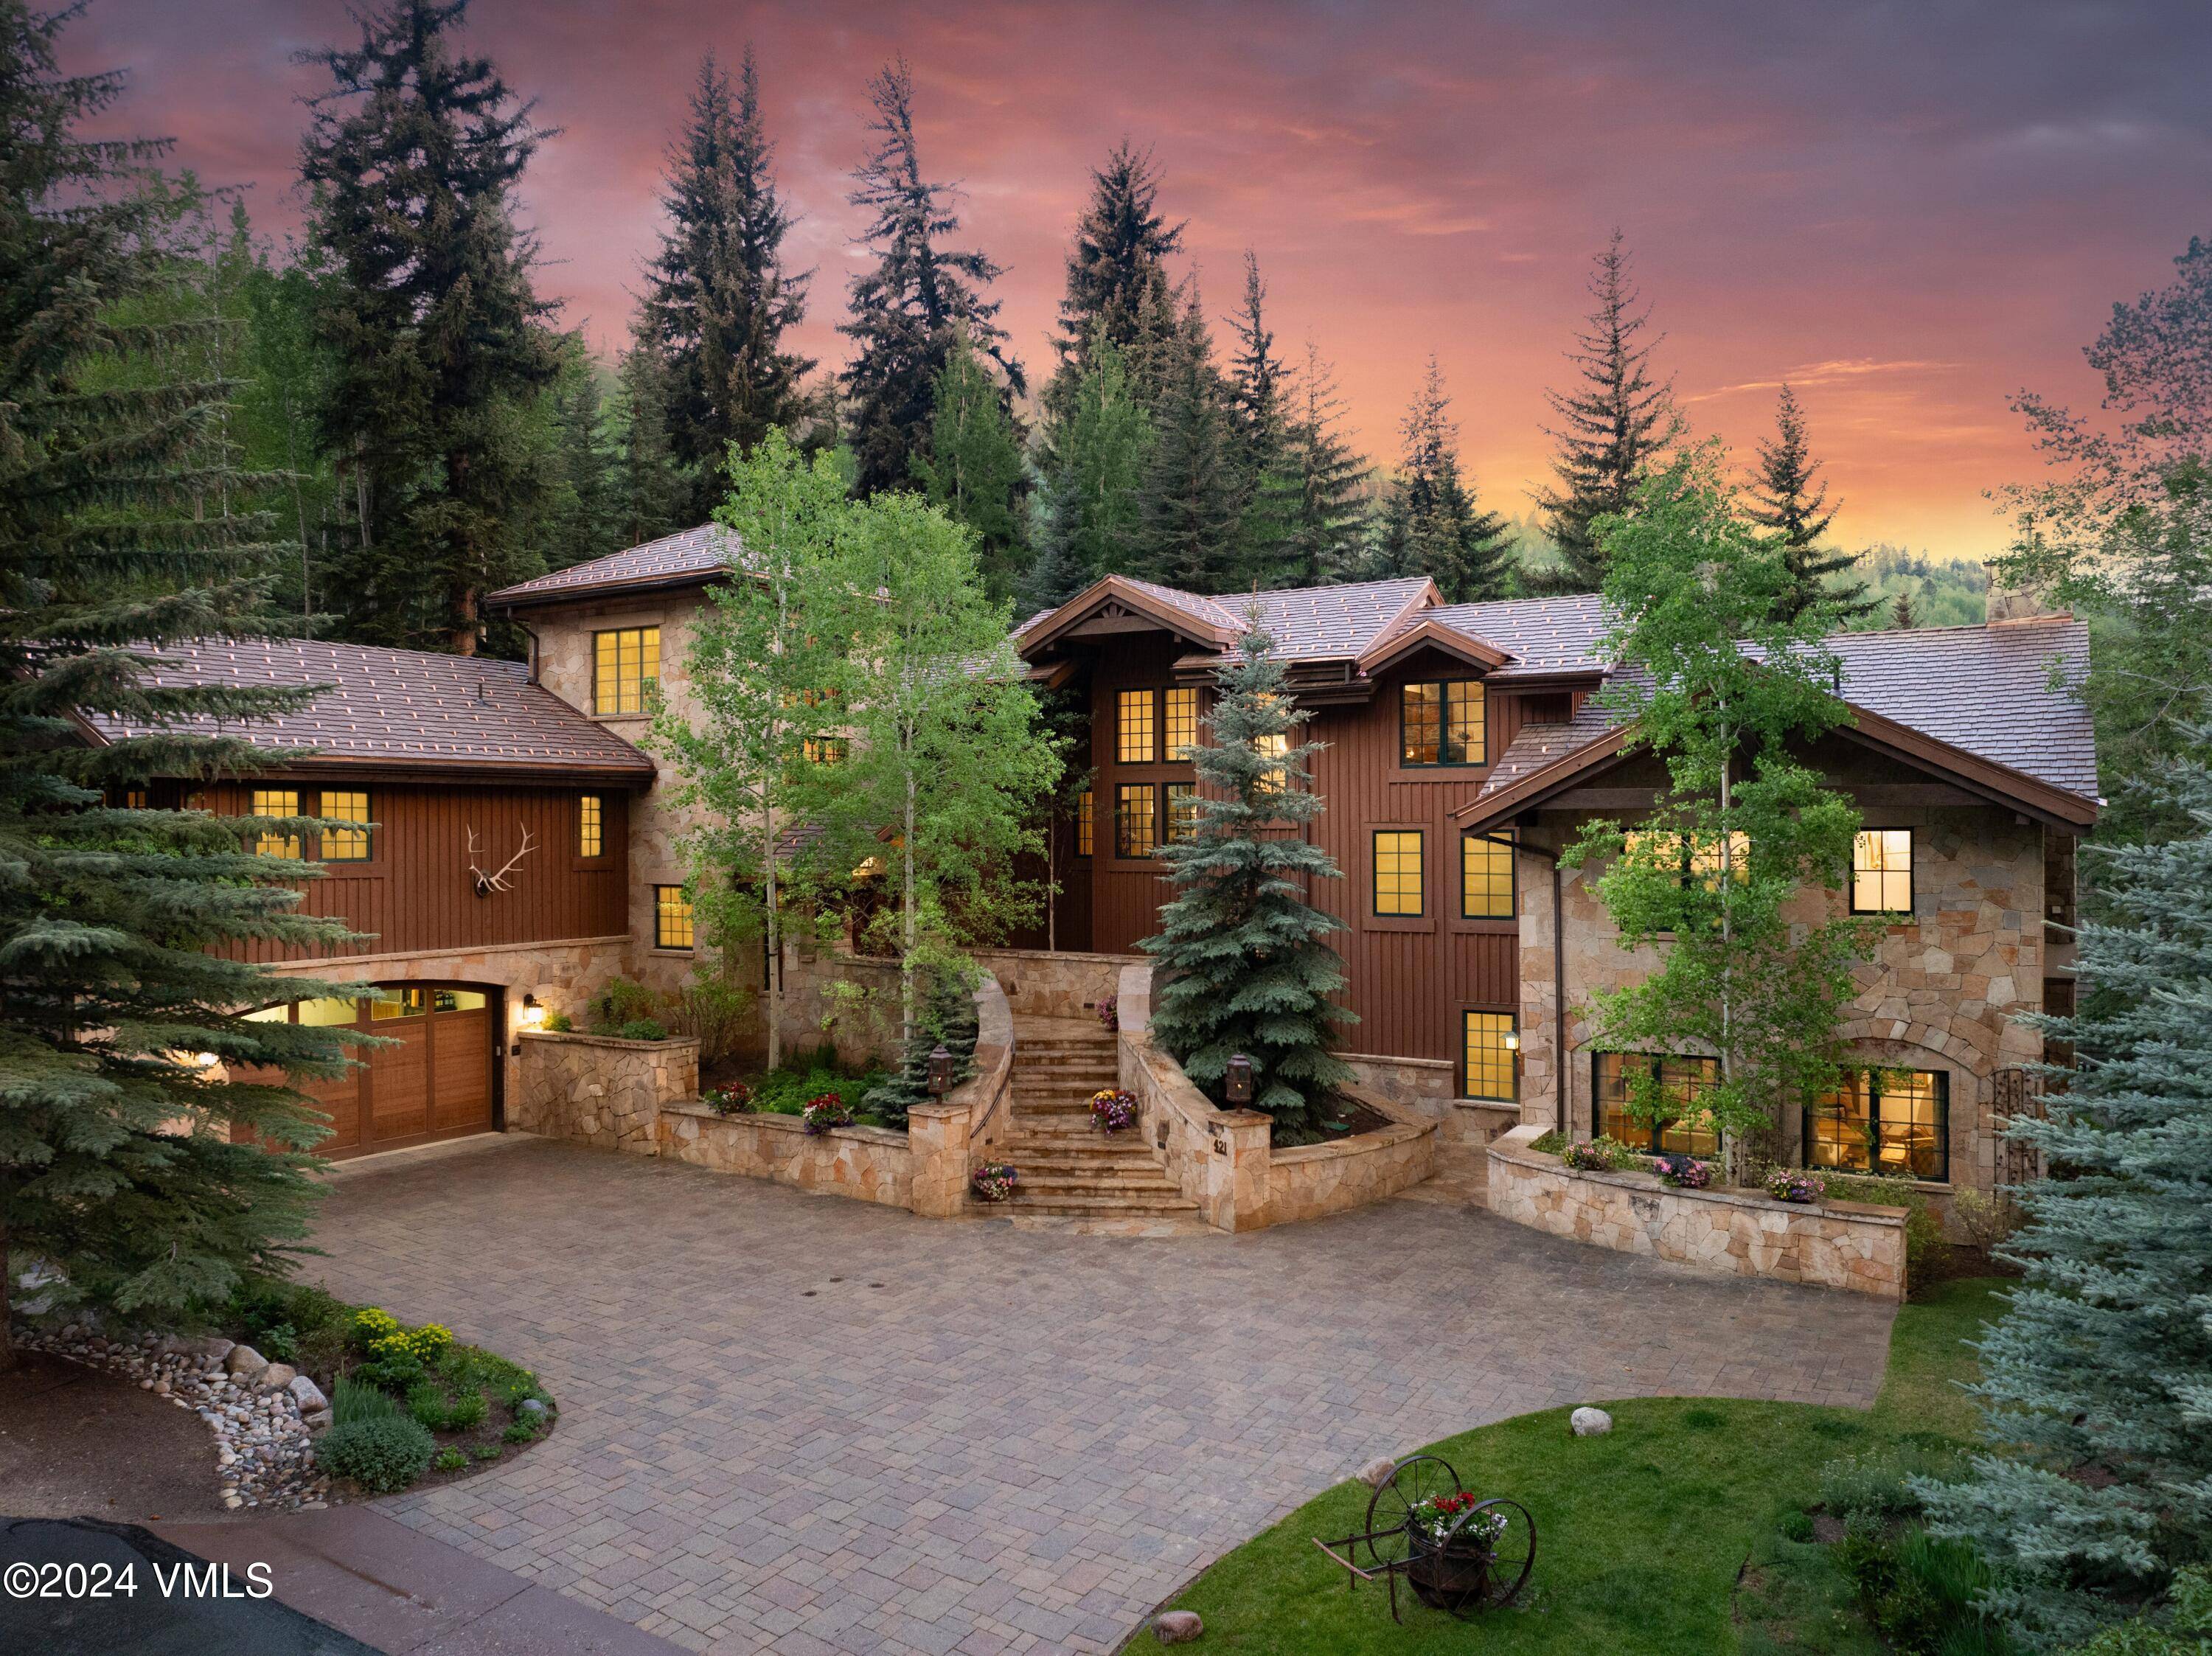 This magnificent Kyle Webb designed mountain residence in one of Vail's most exclusive neighborhoods, is privately situated among natures beauty.